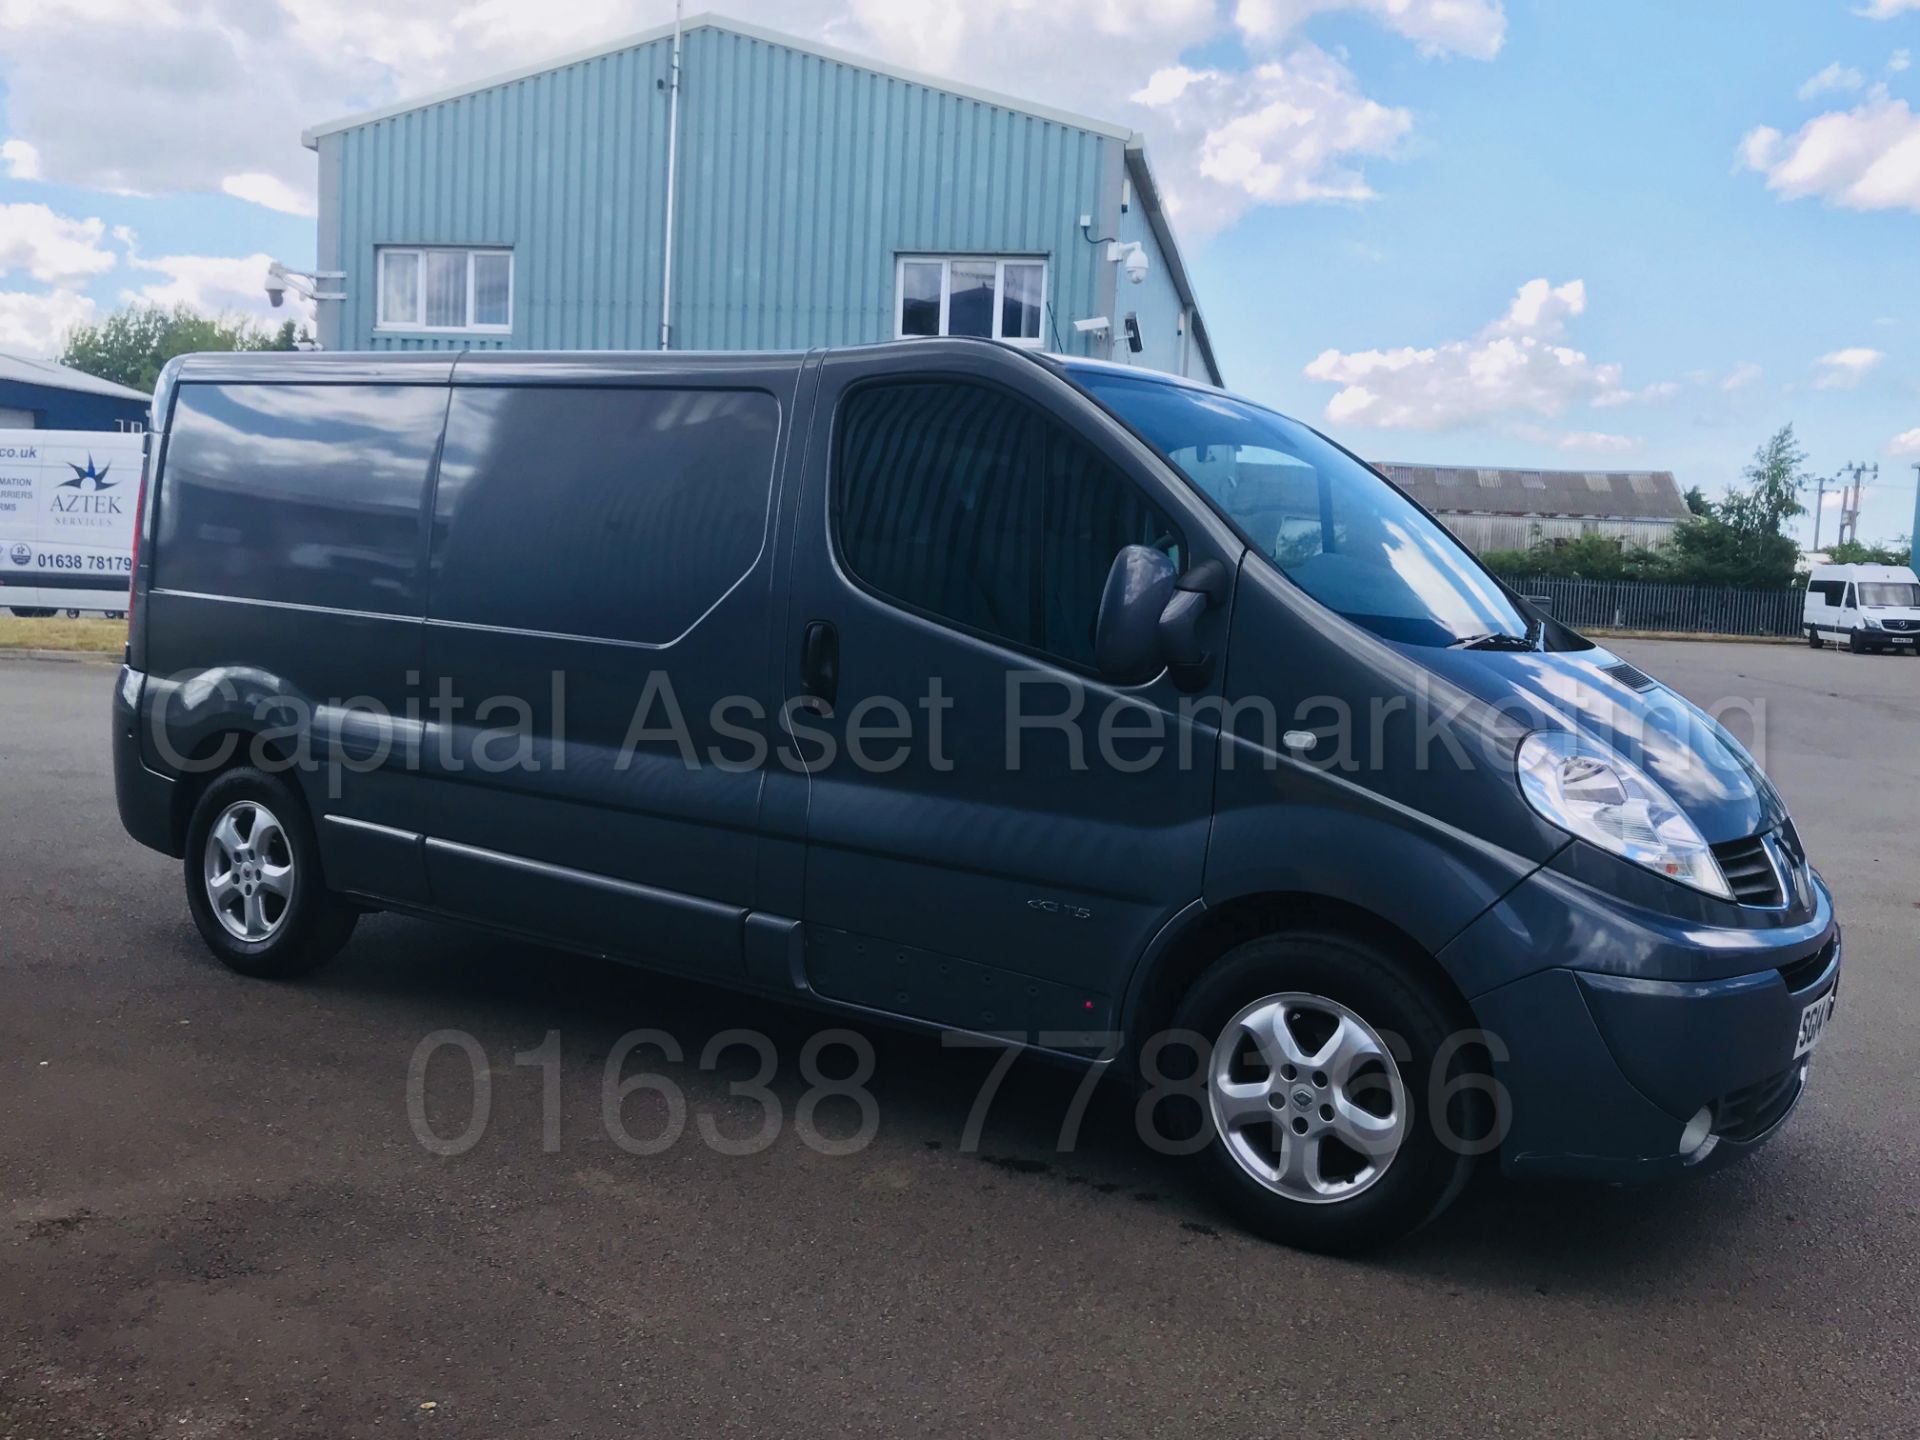 (On Sale) RENAULT TRAFIC 'SPORT EDITION' LWB (2014) '2.0 DCI - 115 BHP - 6 SPEED' *AIR CON* (NO VAT) - Image 9 of 40